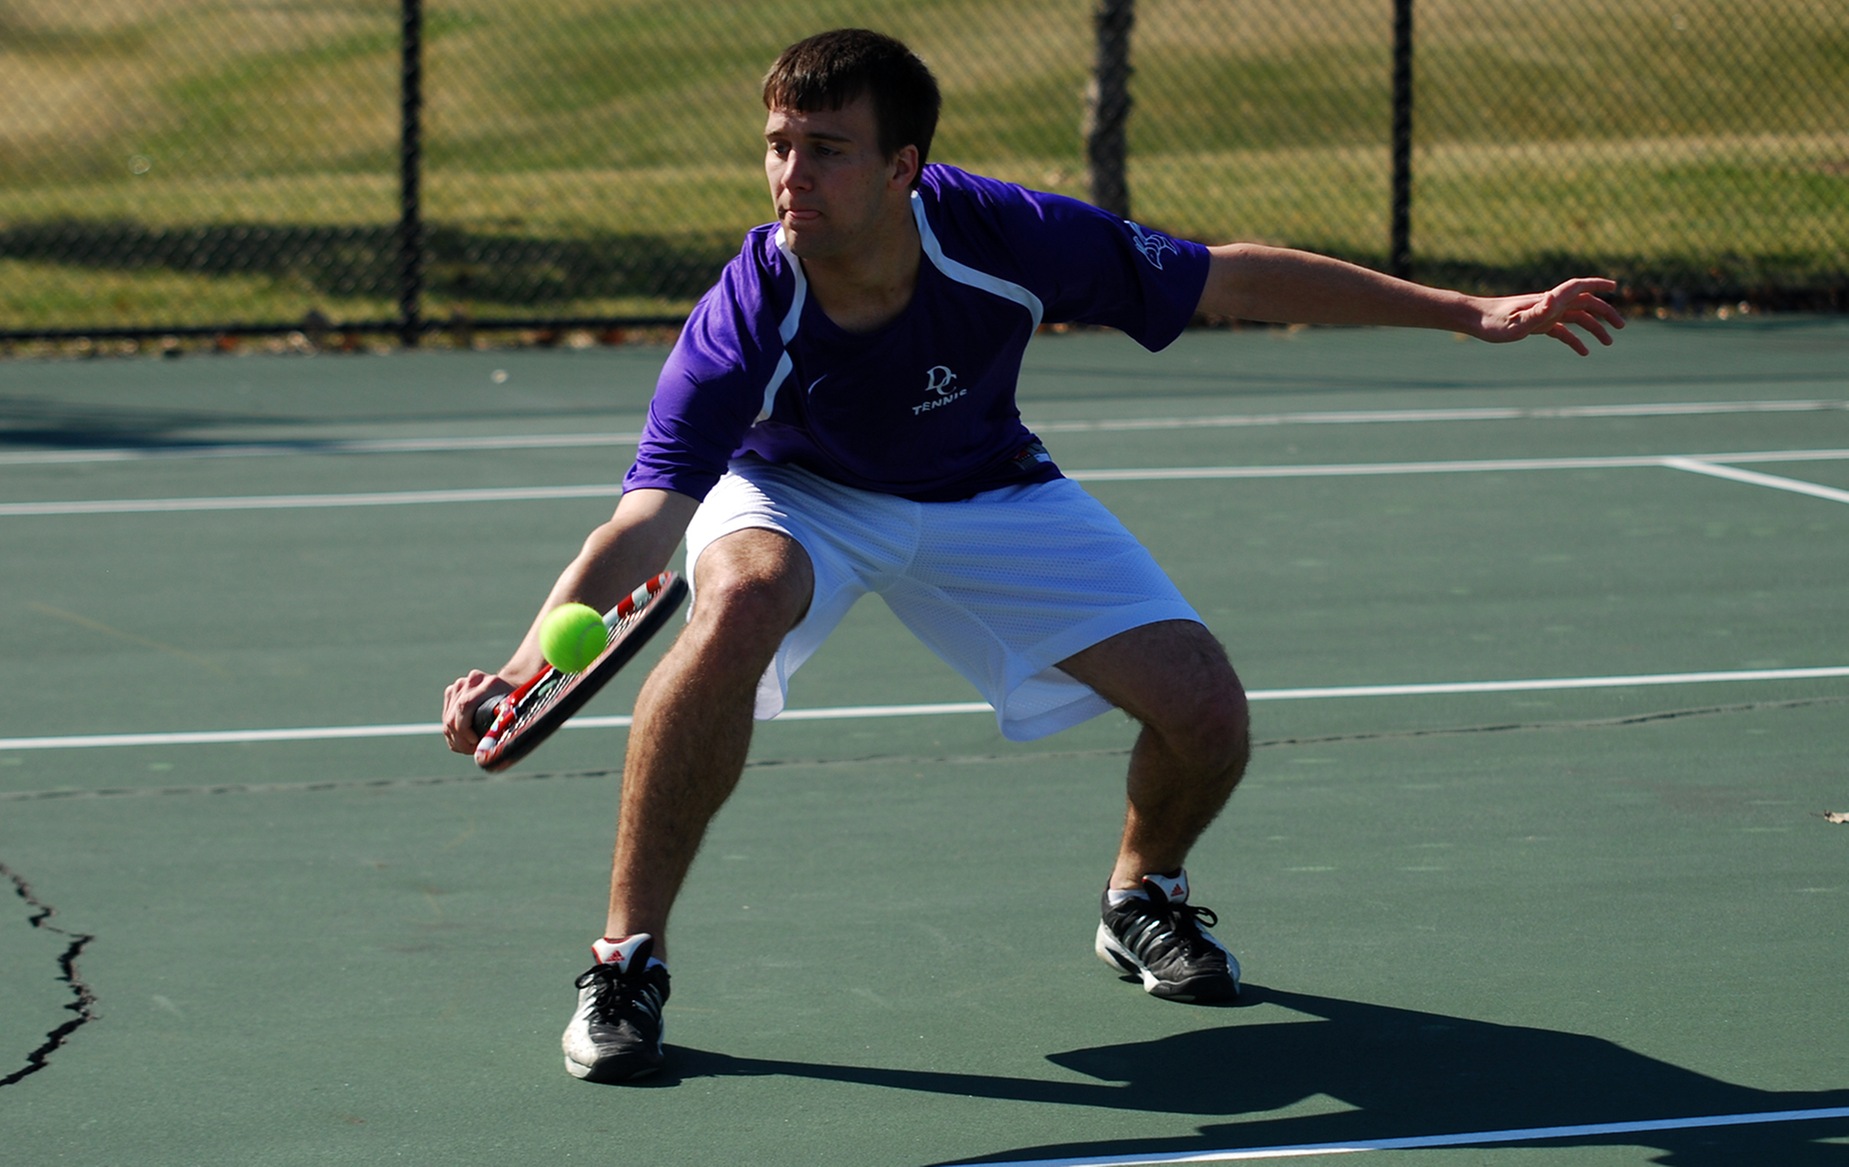 DC Tennis Defeated in First Match of the Season